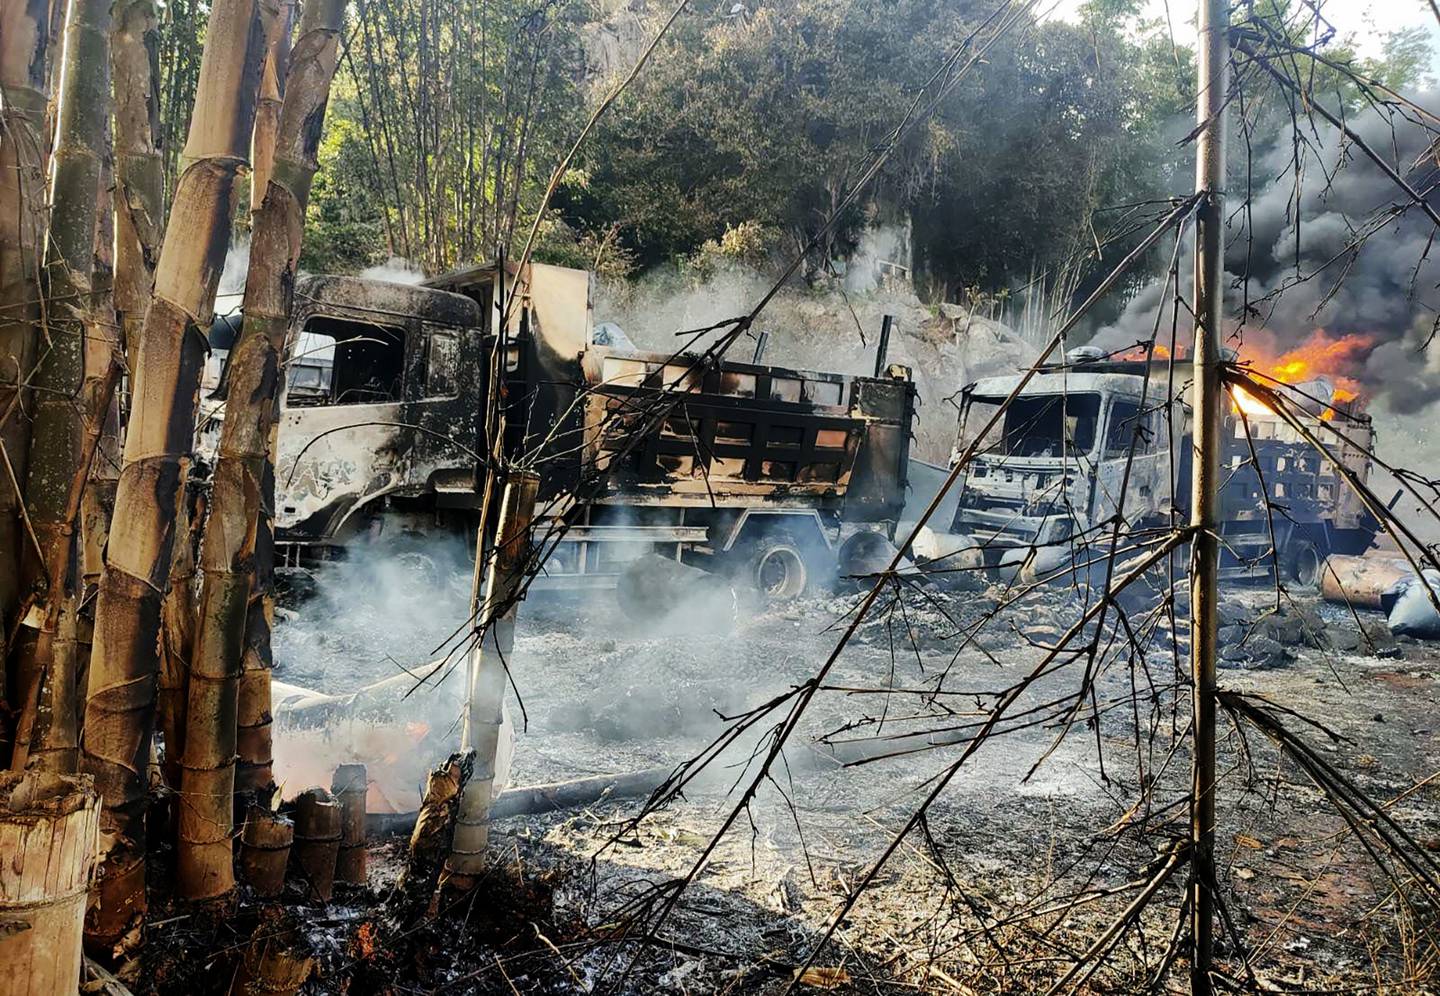 In this photo provided by the Karenni Nationalities Defense Force (KNDF), smokes and flames billow from vehicles in Hpruso township, Kayah state, Myanmar, Friday, Dec. 24, 2021. Myanmar government troops rounded up villagers, some believed to be women and children, fatally shot more than 30 and set the bodies on fire, a witness and other reports said Saturday. (KNDF via AP)